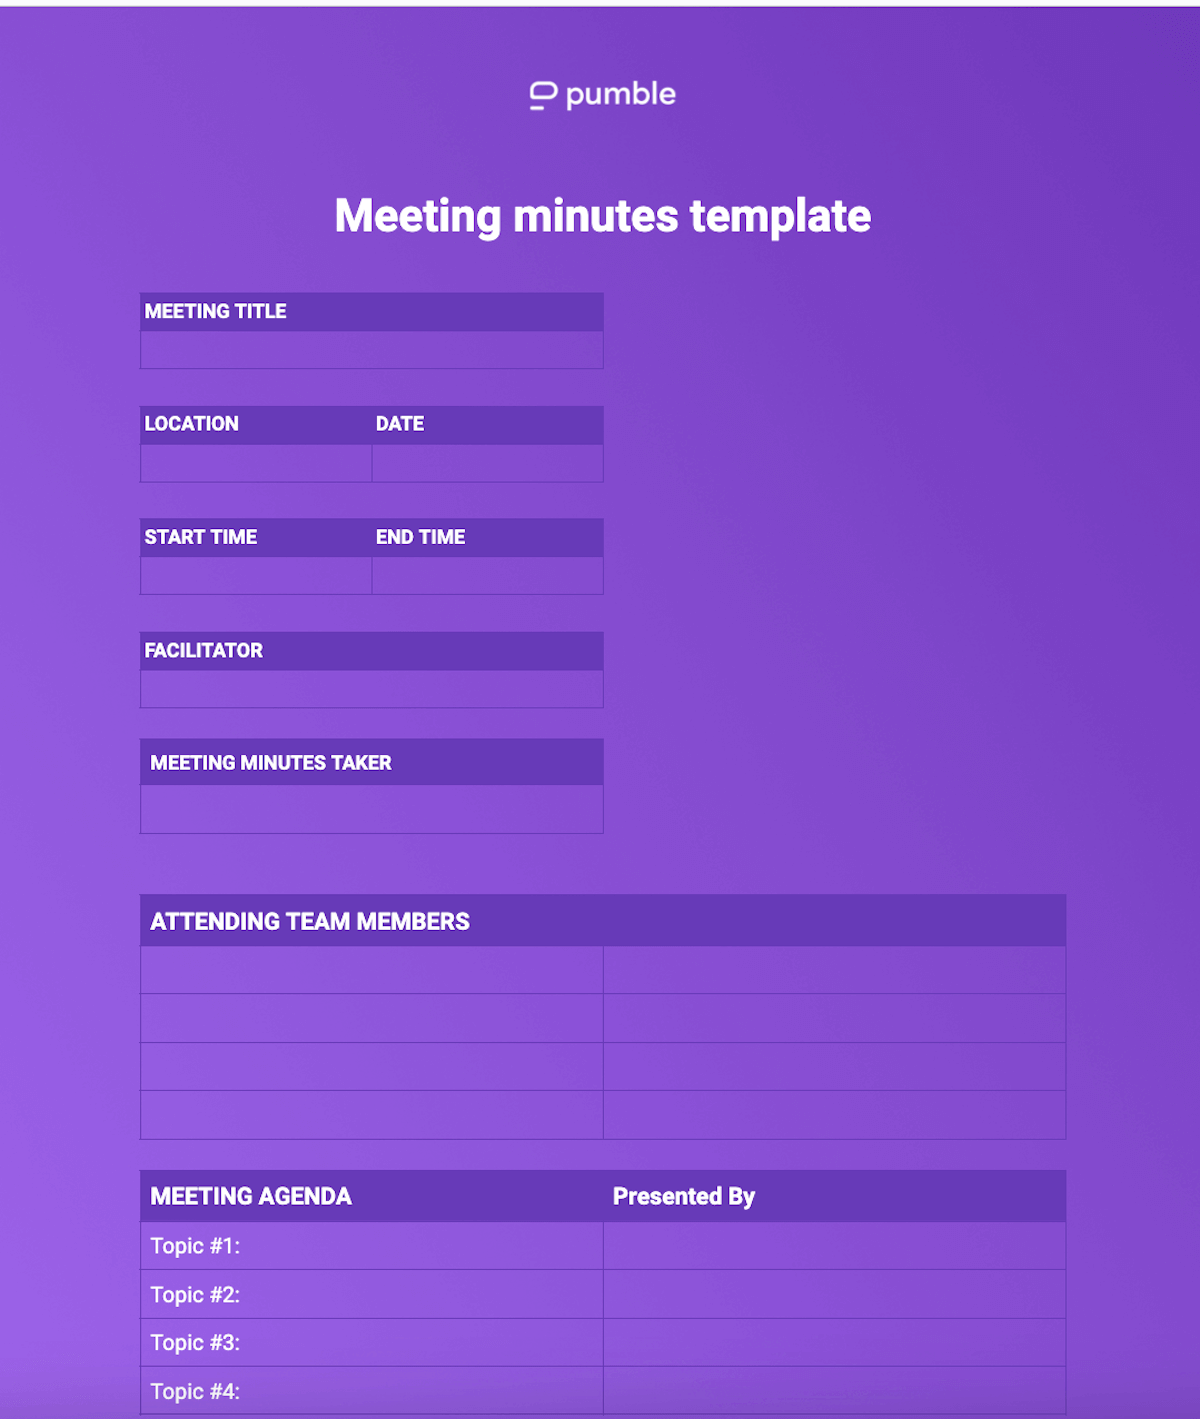 An example of a meeting minutes template